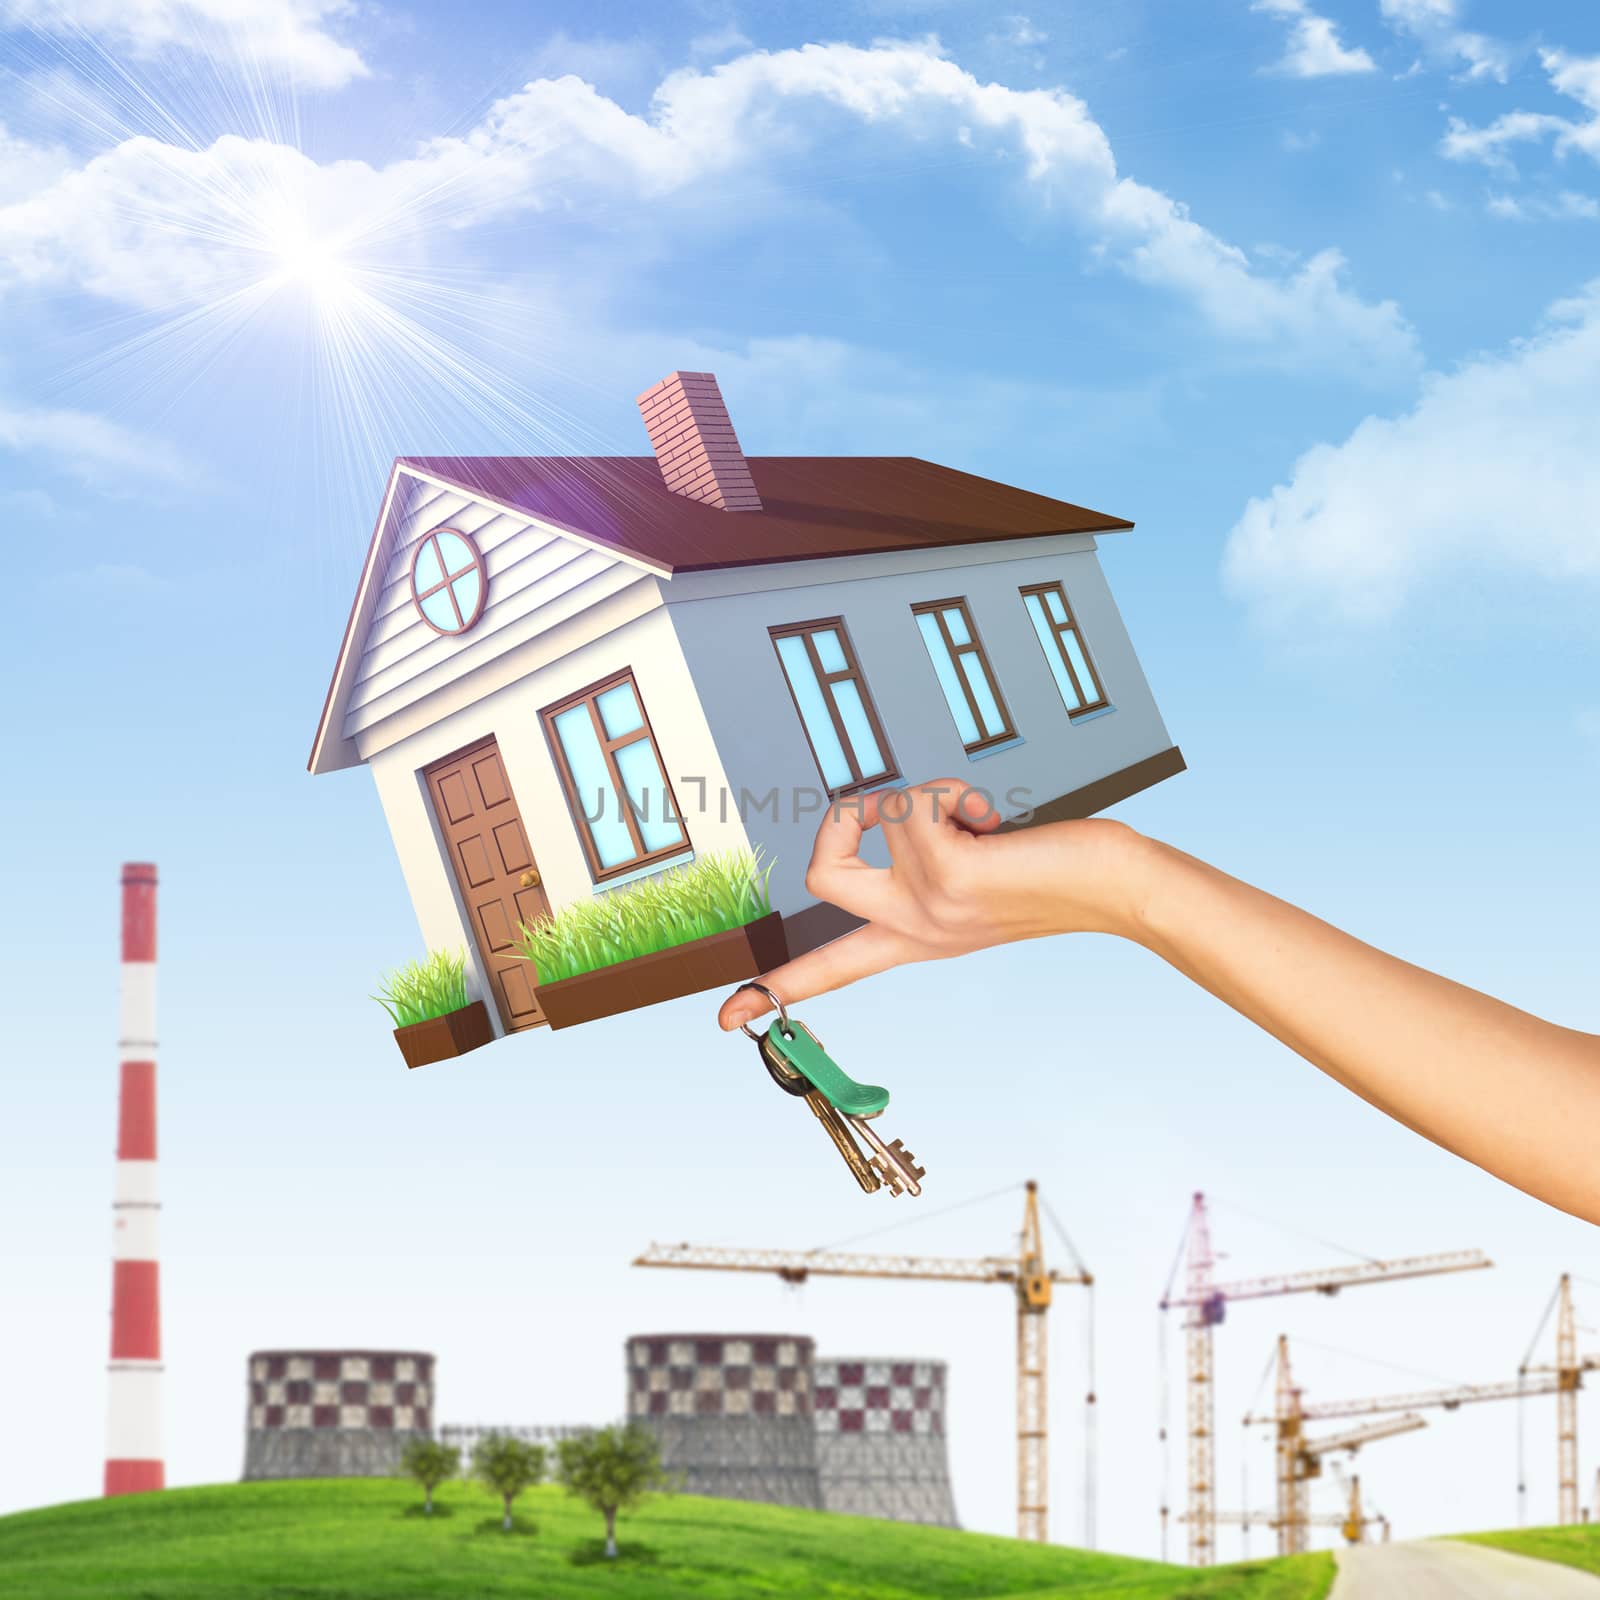 House on businesswomans hand on nature background with building crane, NPP